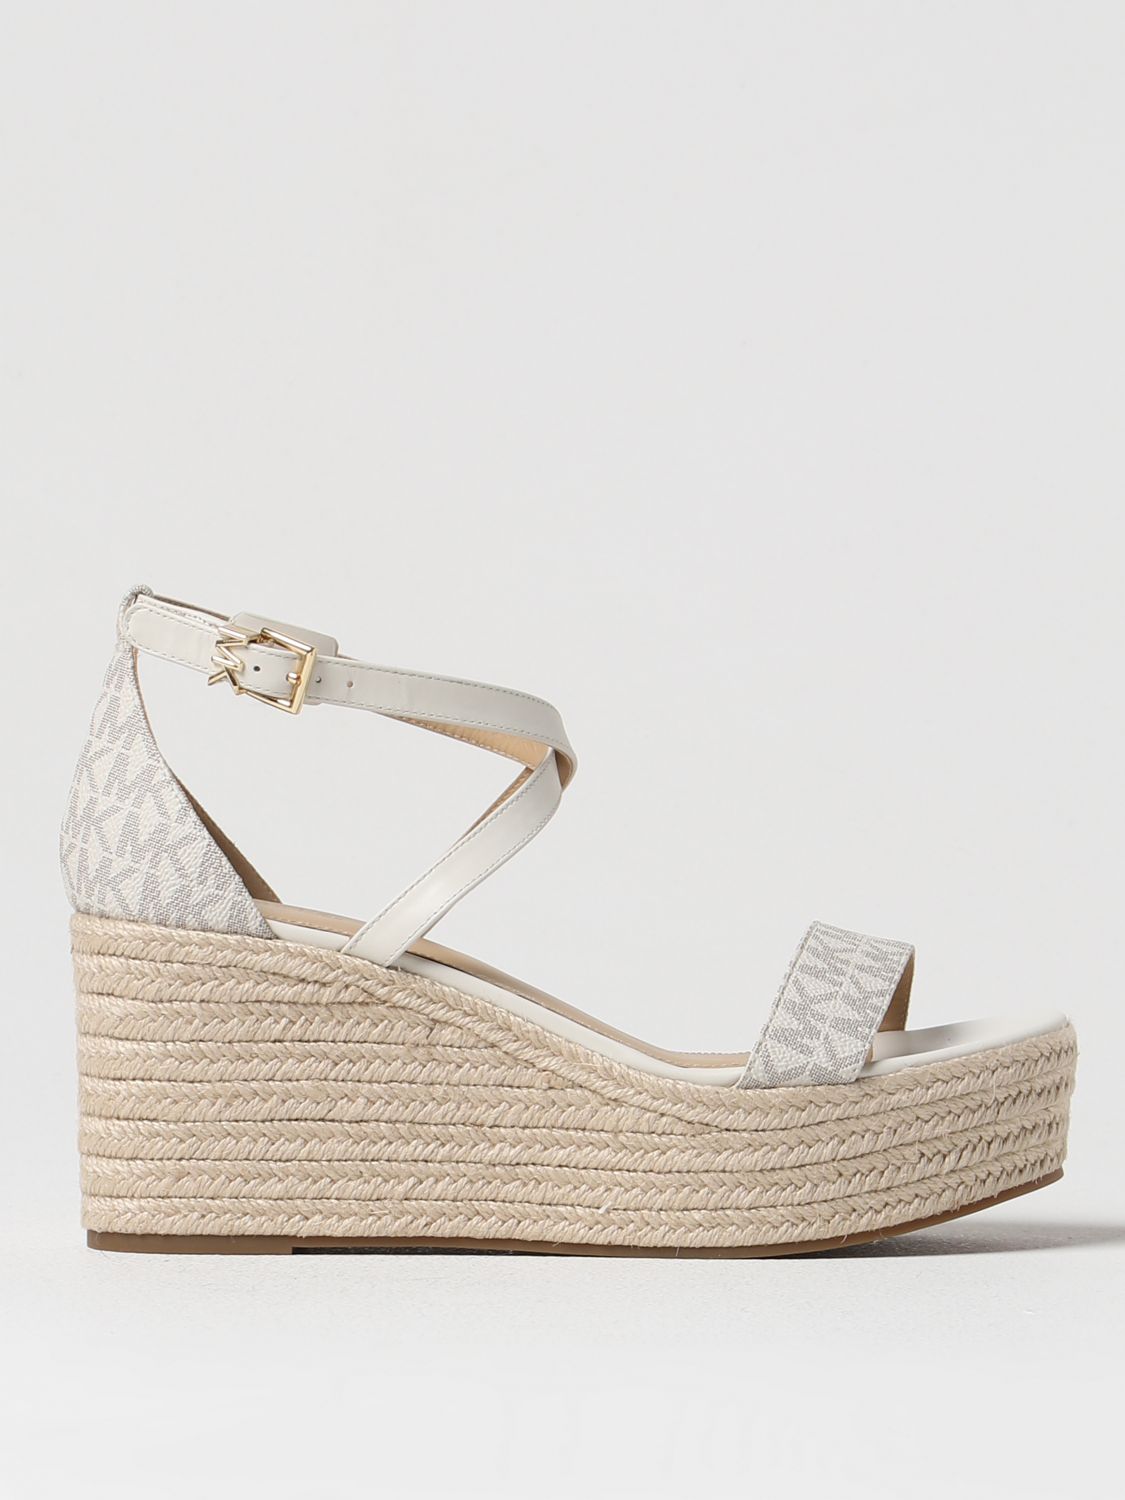 Michael Kors Wedge Shoes  Woman Color Ivory